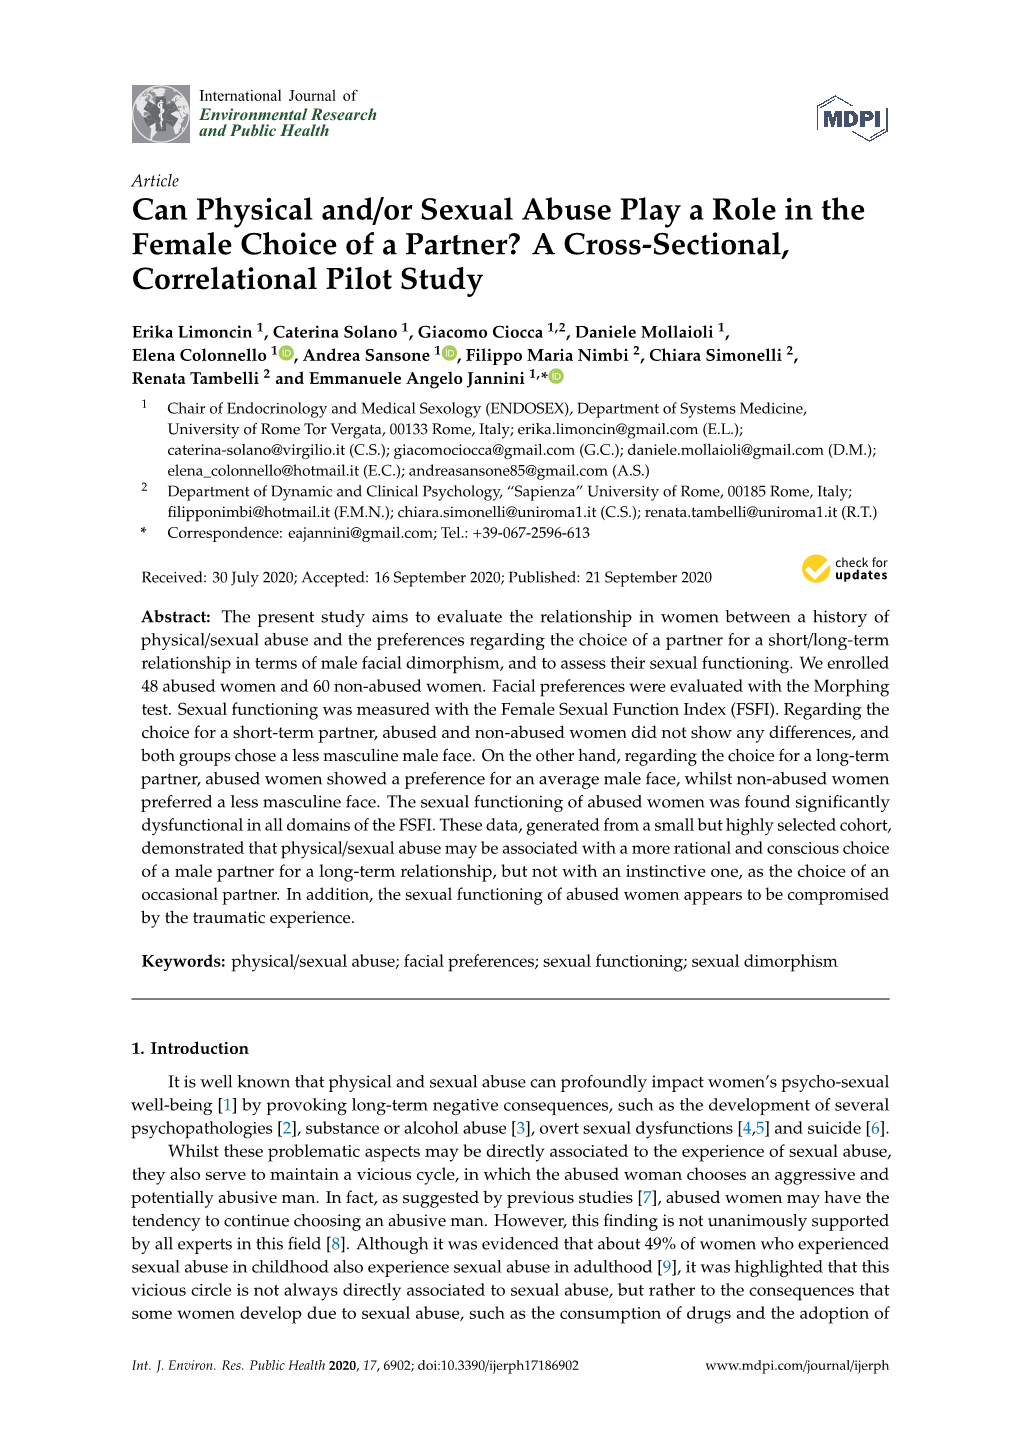 Can Physical And/Or Sexual Abuse Play a Role in the Female Choice of a Partner? a Cross-Sectional, Correlational Pilot Study